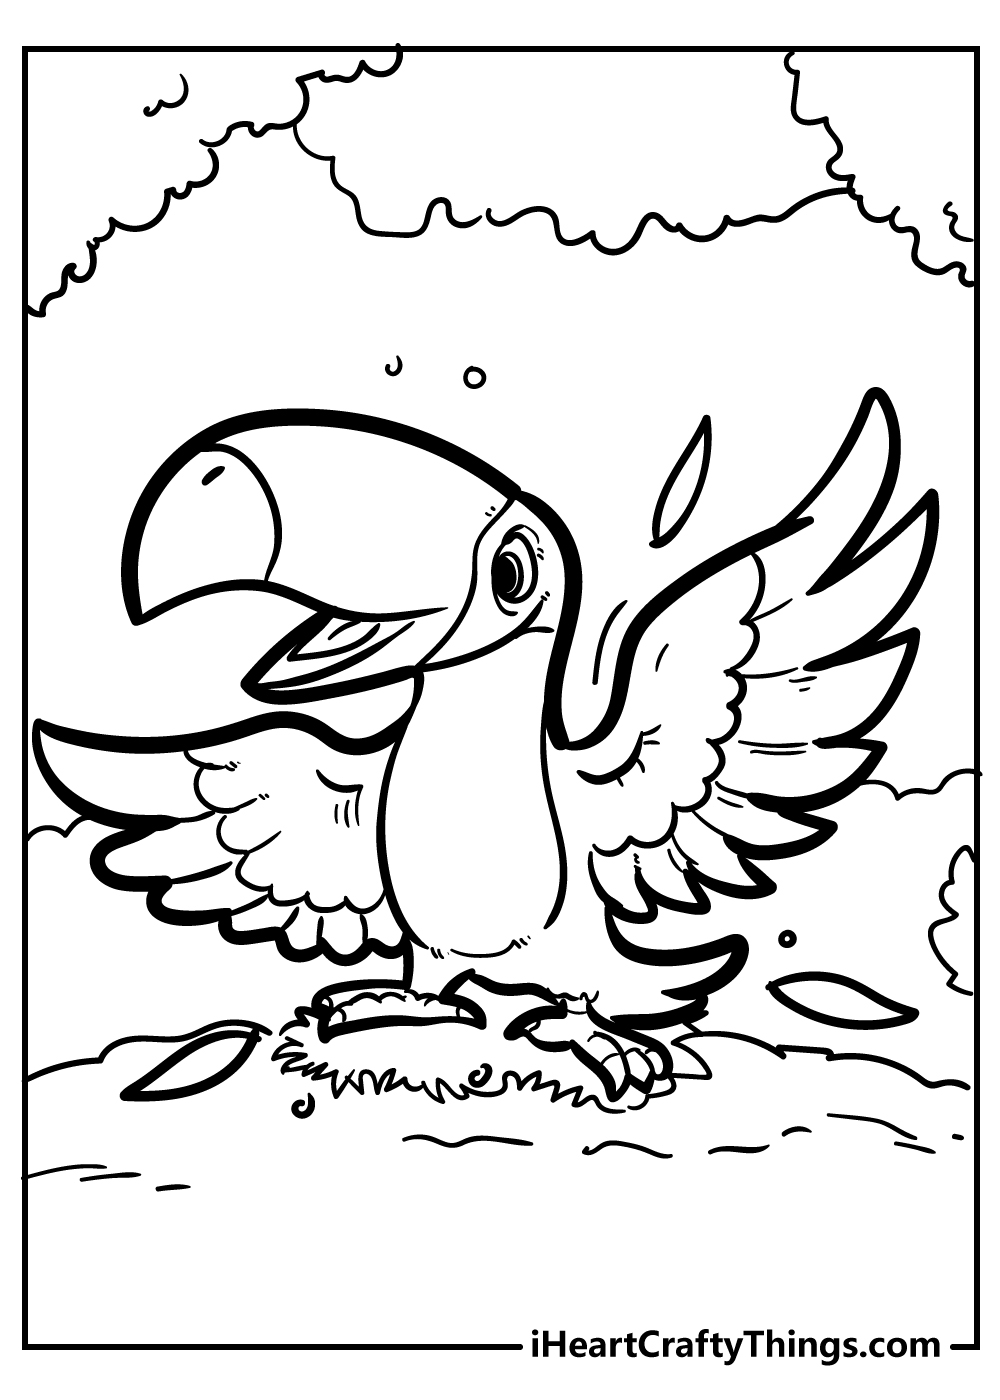 Bird Coloring Pages for kids free download